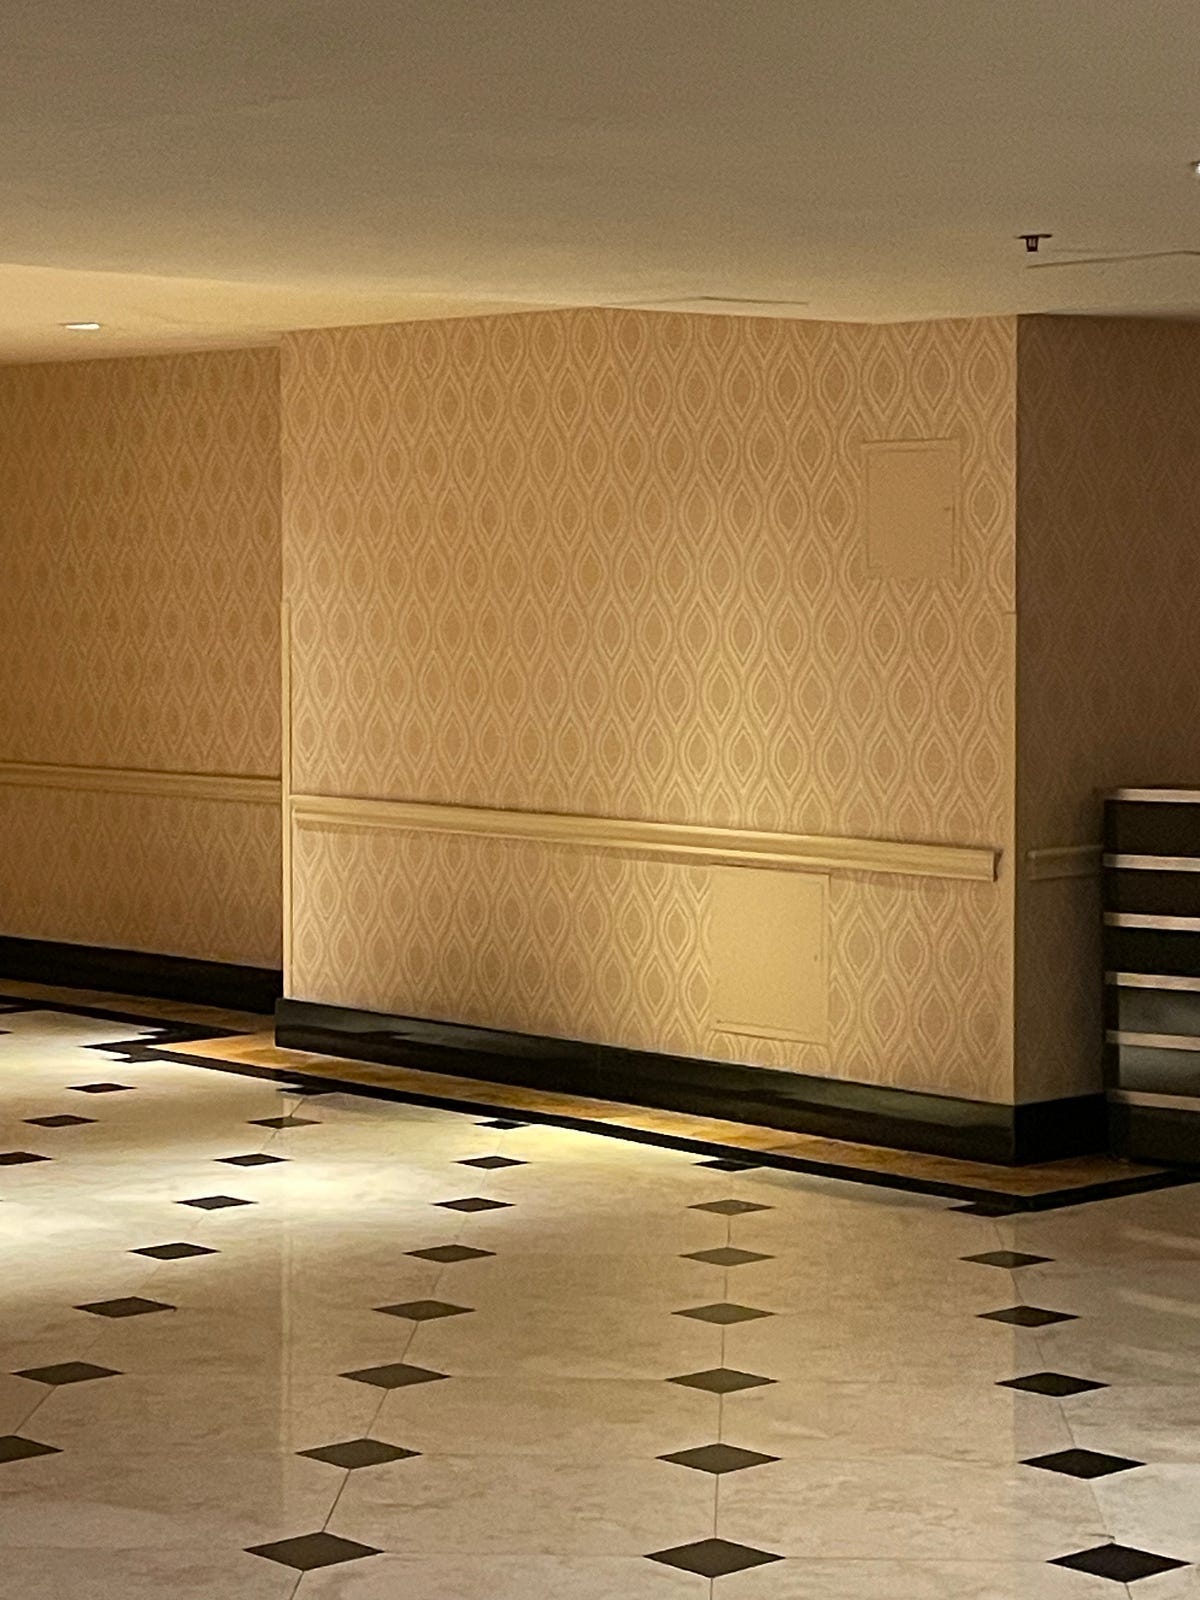 An image of a hallway that could be from any point in time that modern buildings exist, with yellowish lighting that suggests comfort and threat